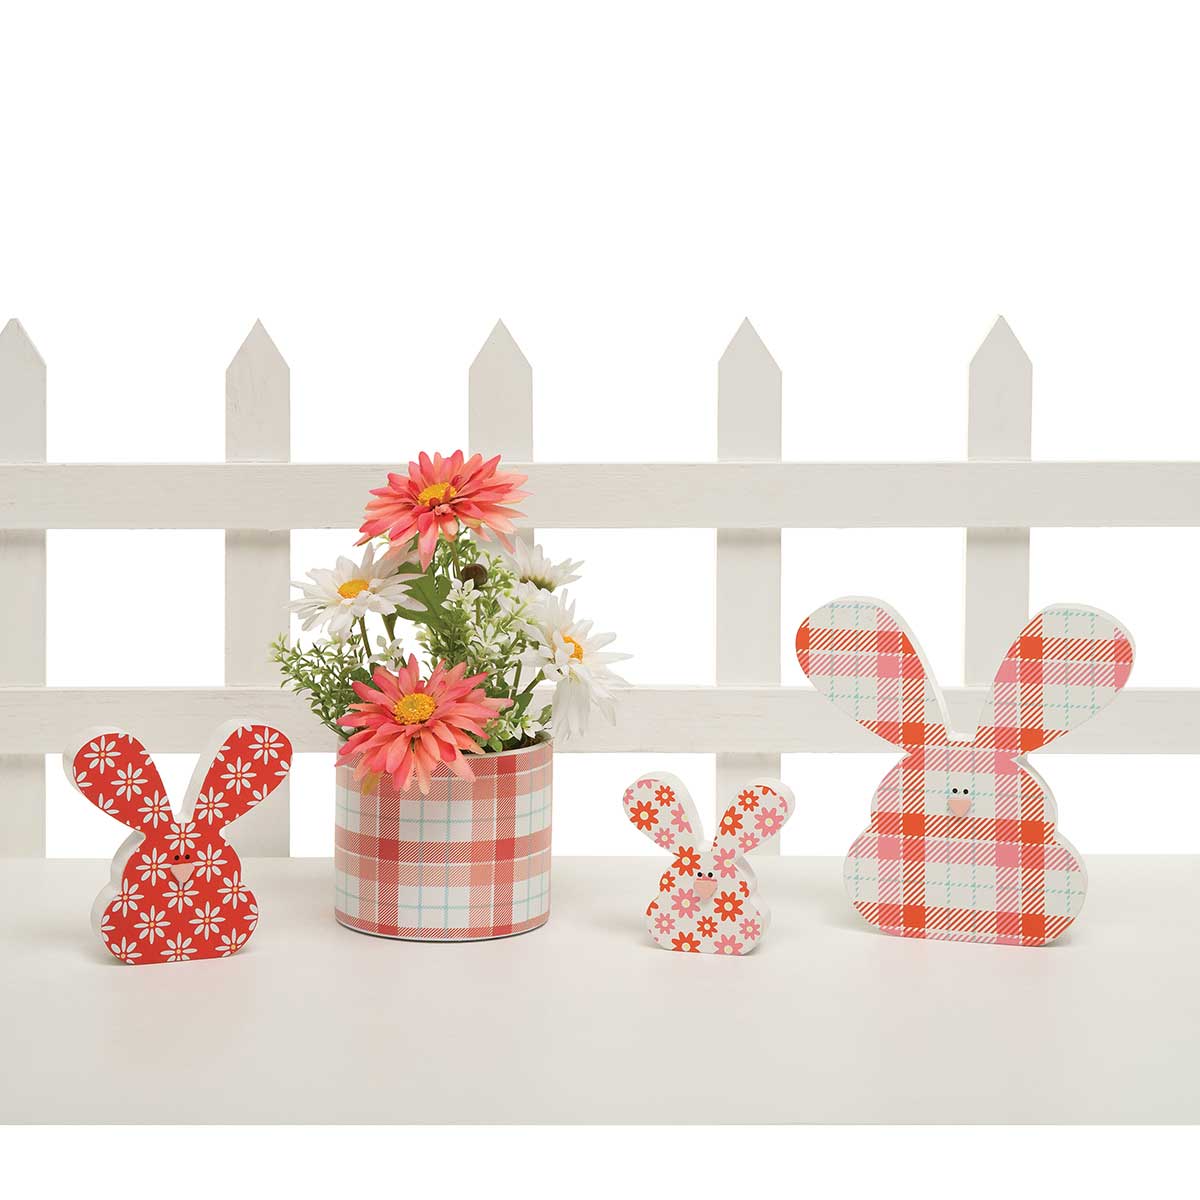 CORAL FAIR WOOD BUNNY SIT-A-BOUT CORAL/WHITE/BLUE